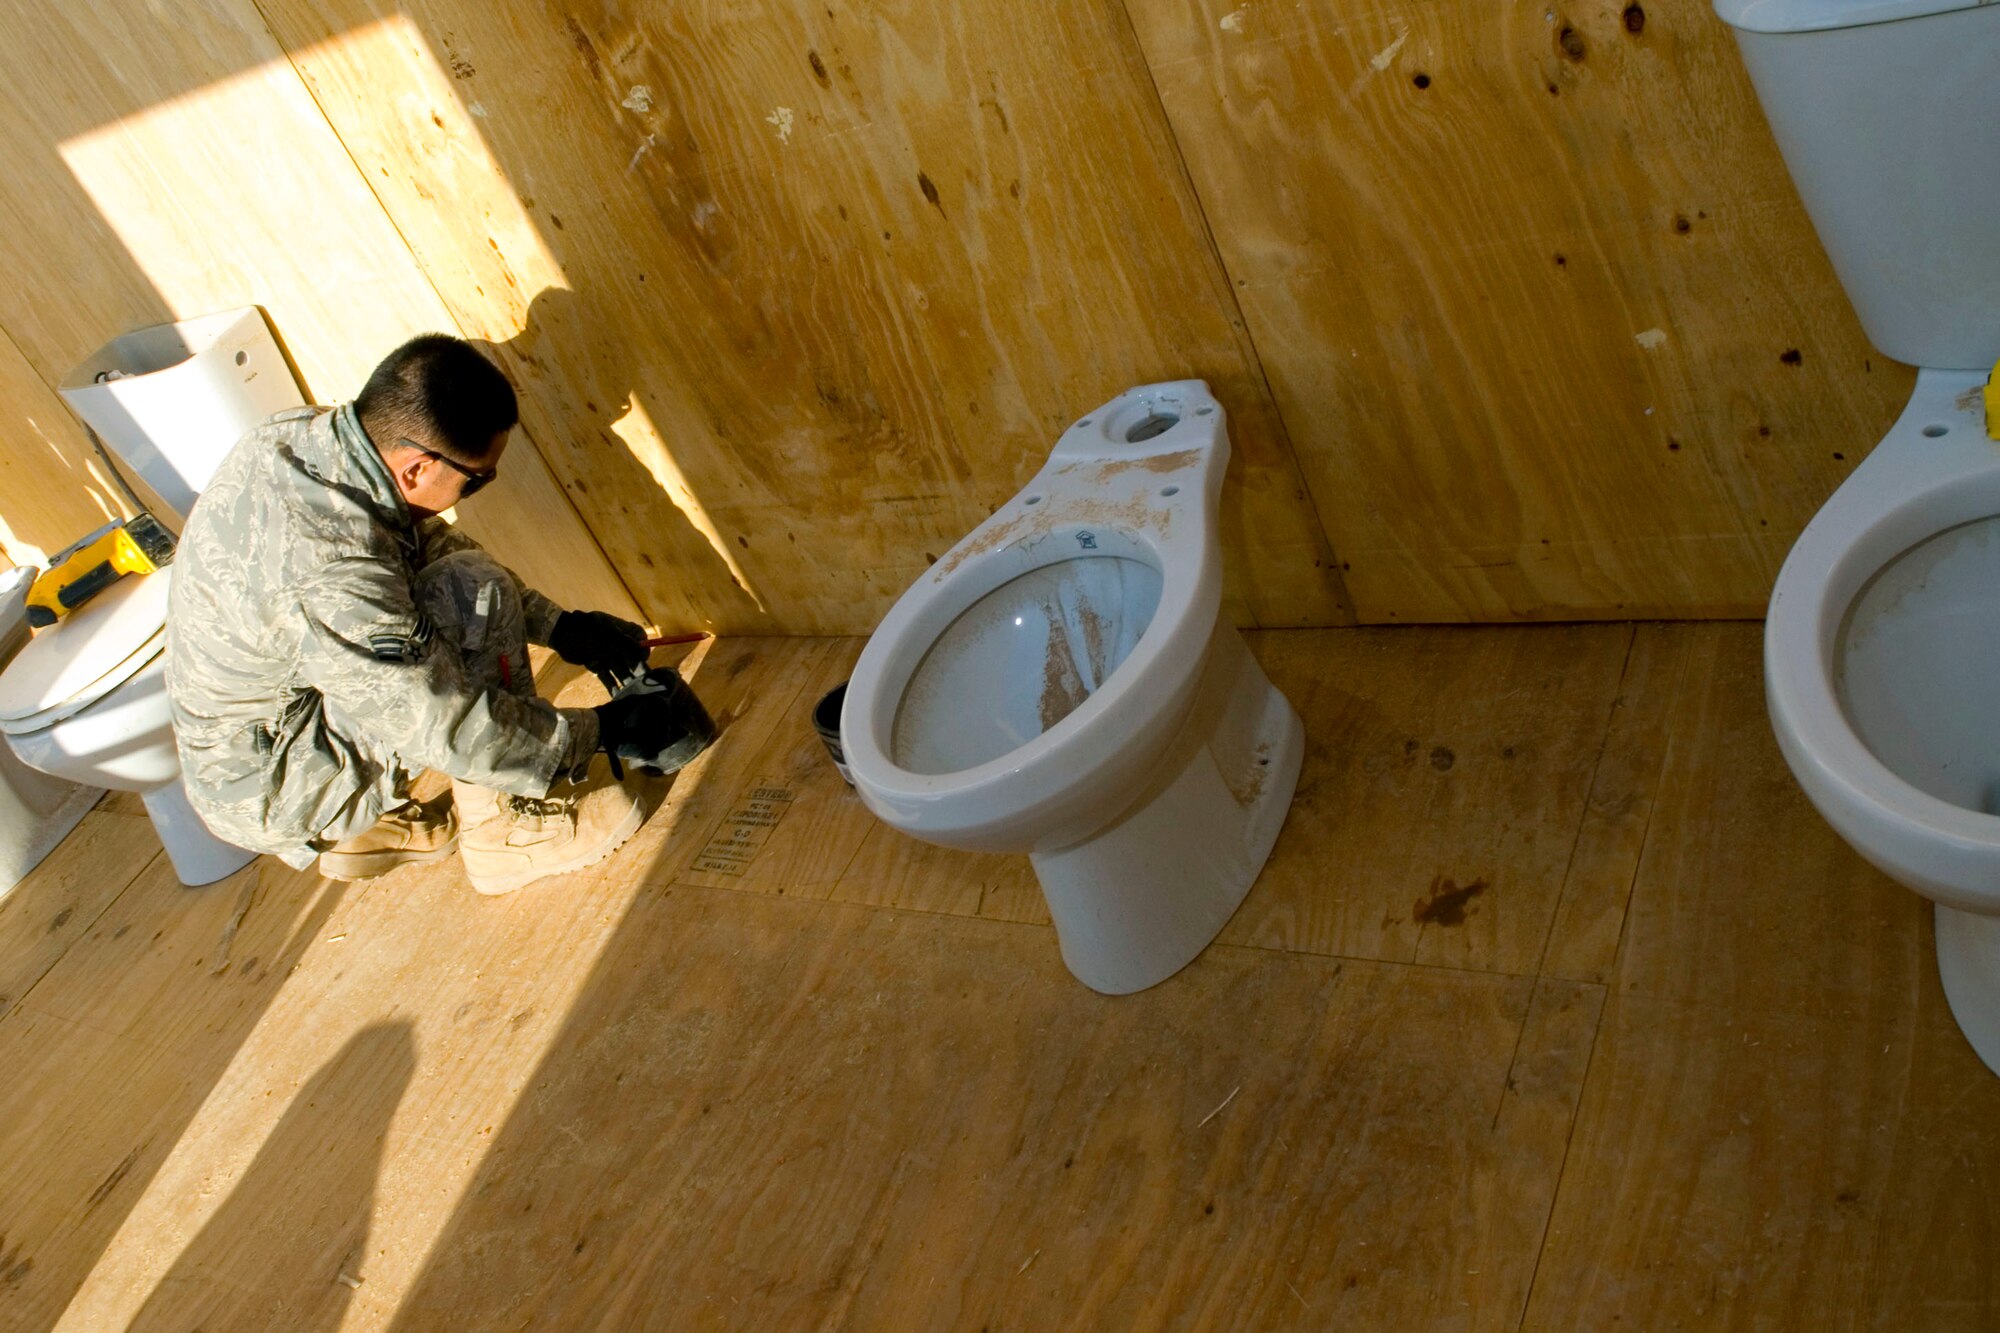 Senior Airman Ernesto Racoma measures the distance between toilets on a shower latrine unit Jan. 15 at Balad Air Base, Iraq. The placement measurements allow the Airman to ensure a proper fit when installing the toilets. Airman Racoma, a 732nd Expeditionary Civil Engineer Squadron utility technician, is deployed from Beale Air Force Base, Calif. (U.S. Air Force photo/Staff Sgt. Joshua Garcia) 
